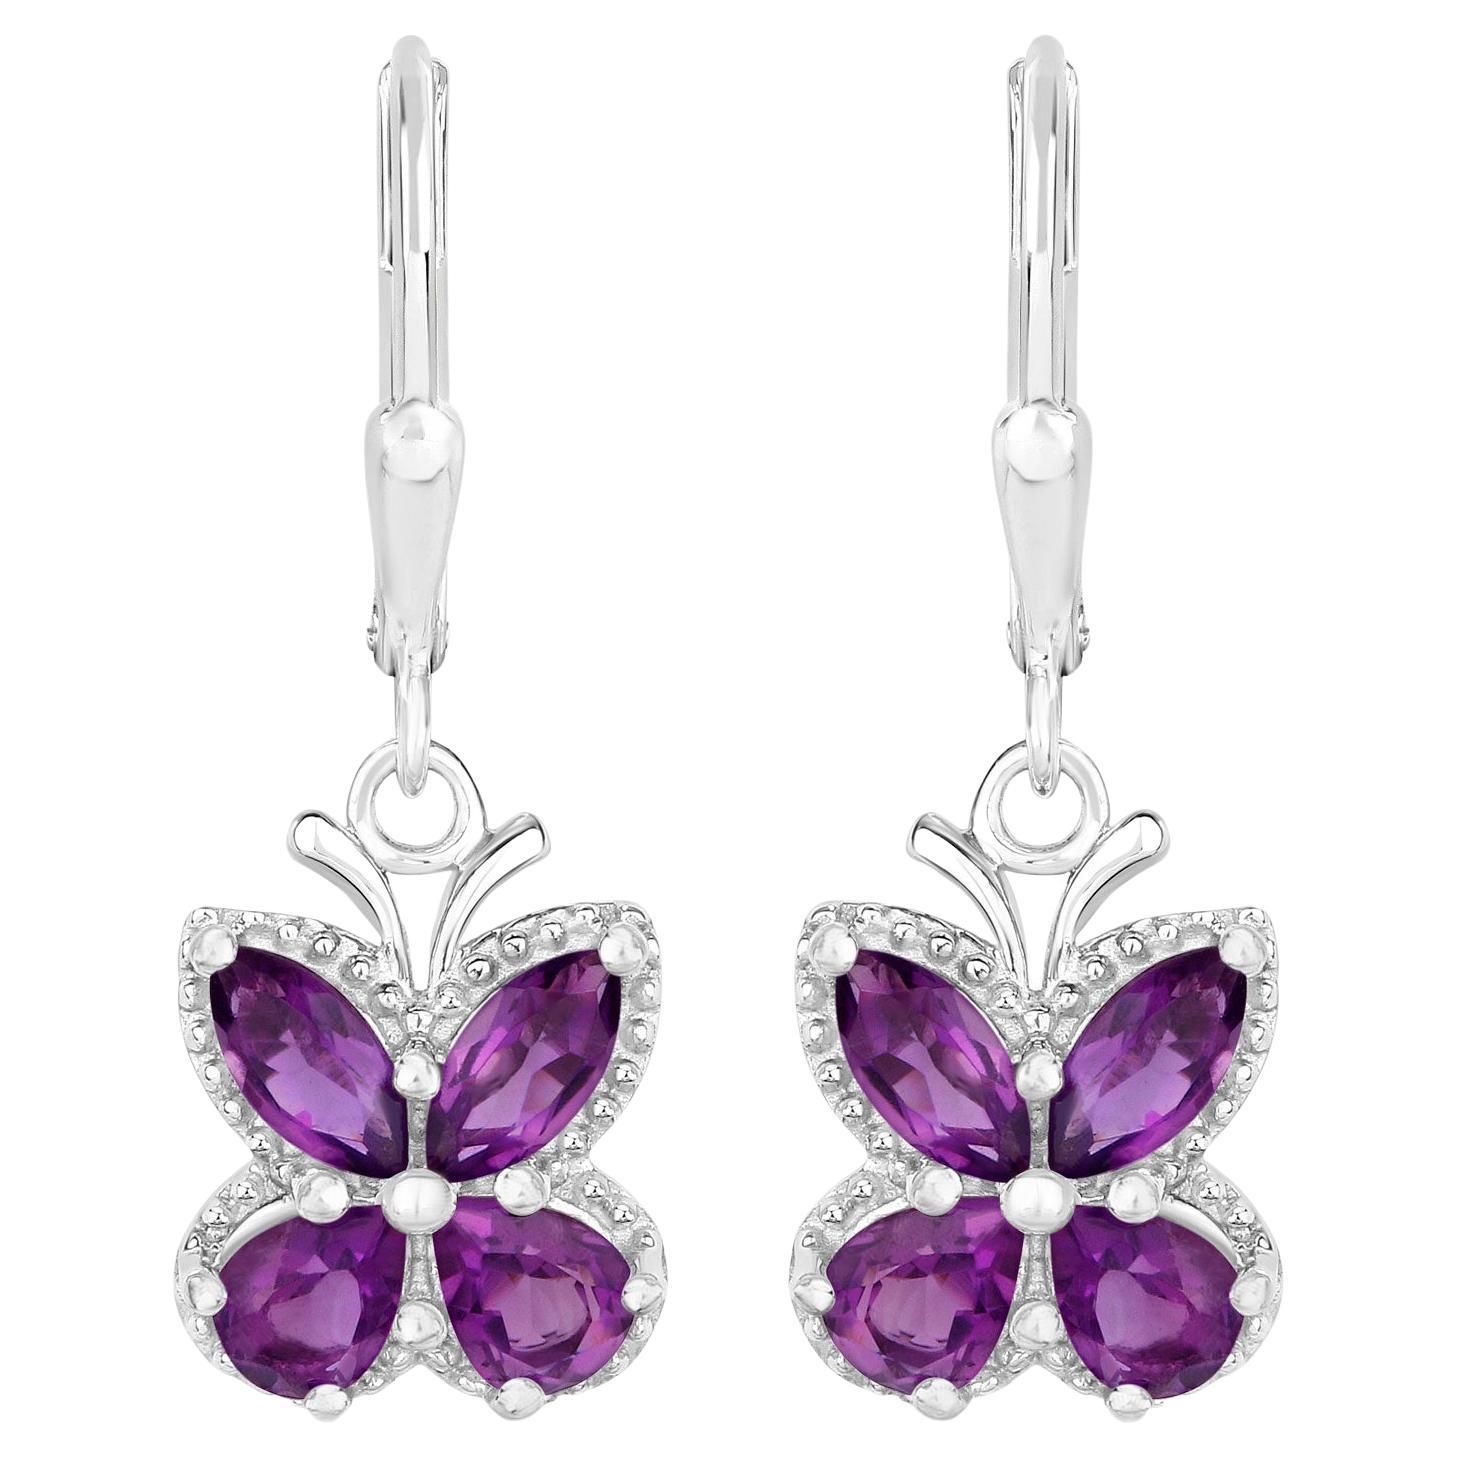 Amethyst Butterfly Earrings 2.12 Carats Rhodium Plated Sterling Silver For Sale